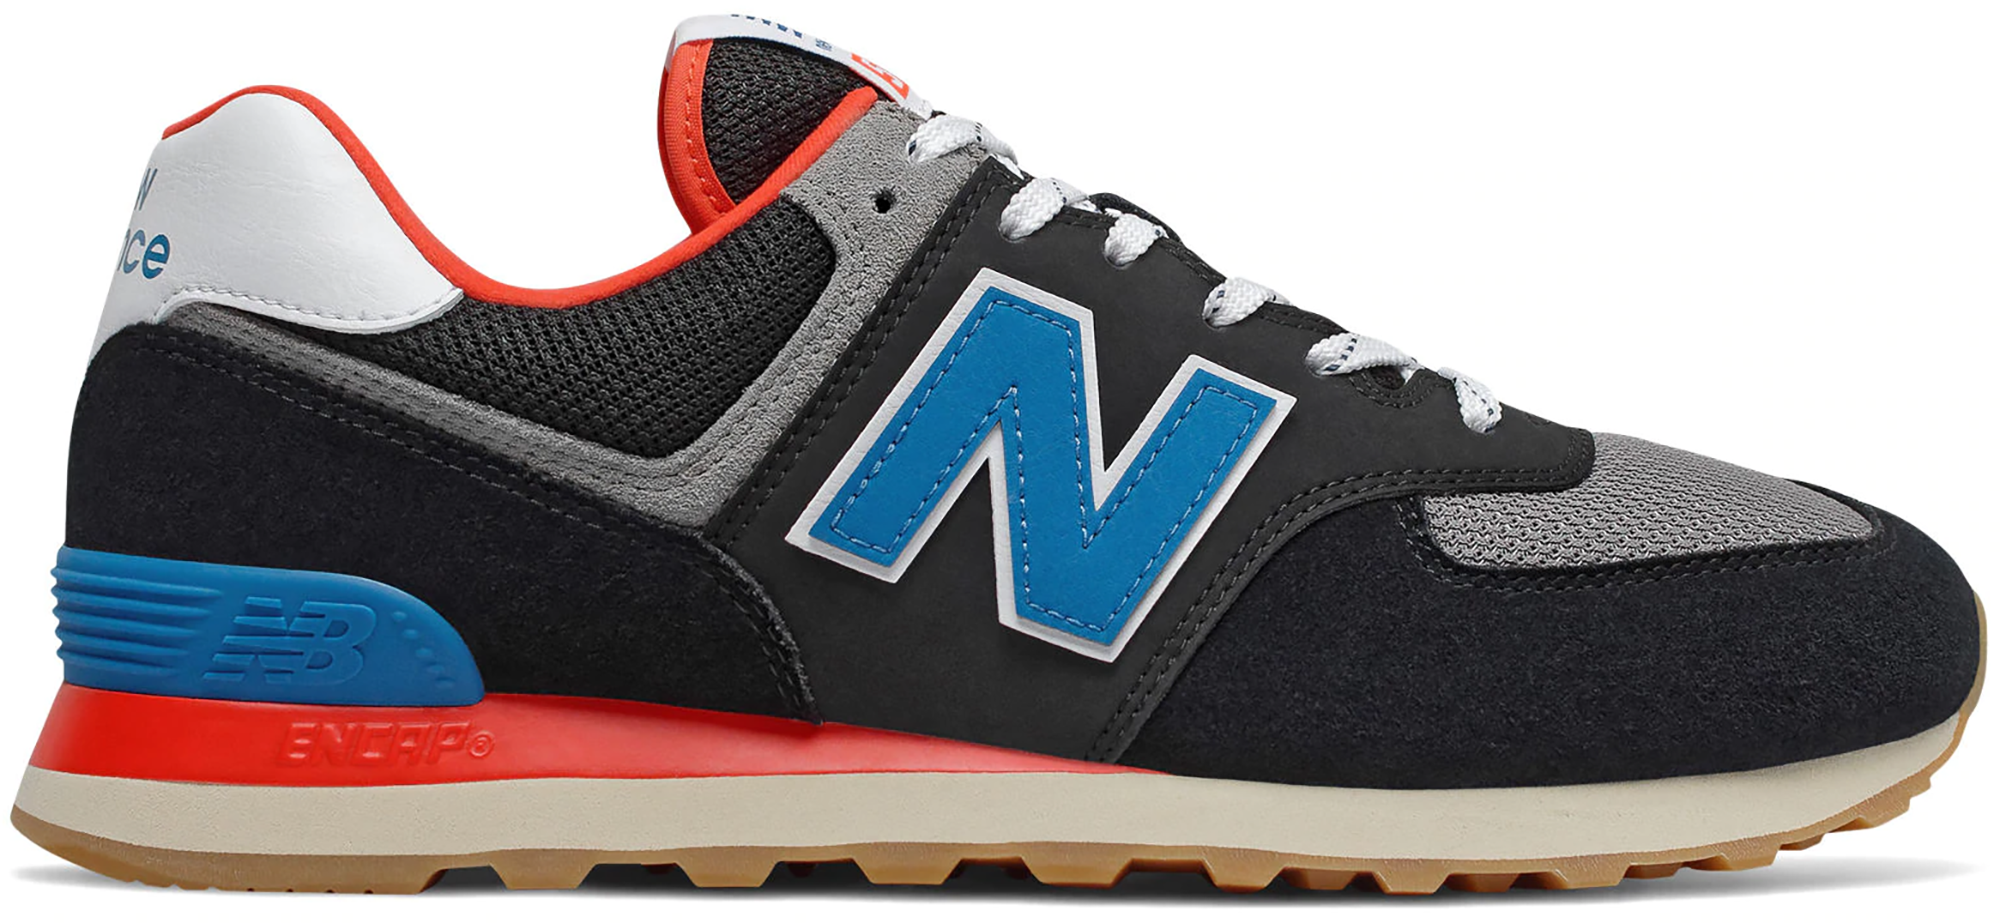 new balance 574 blue and red